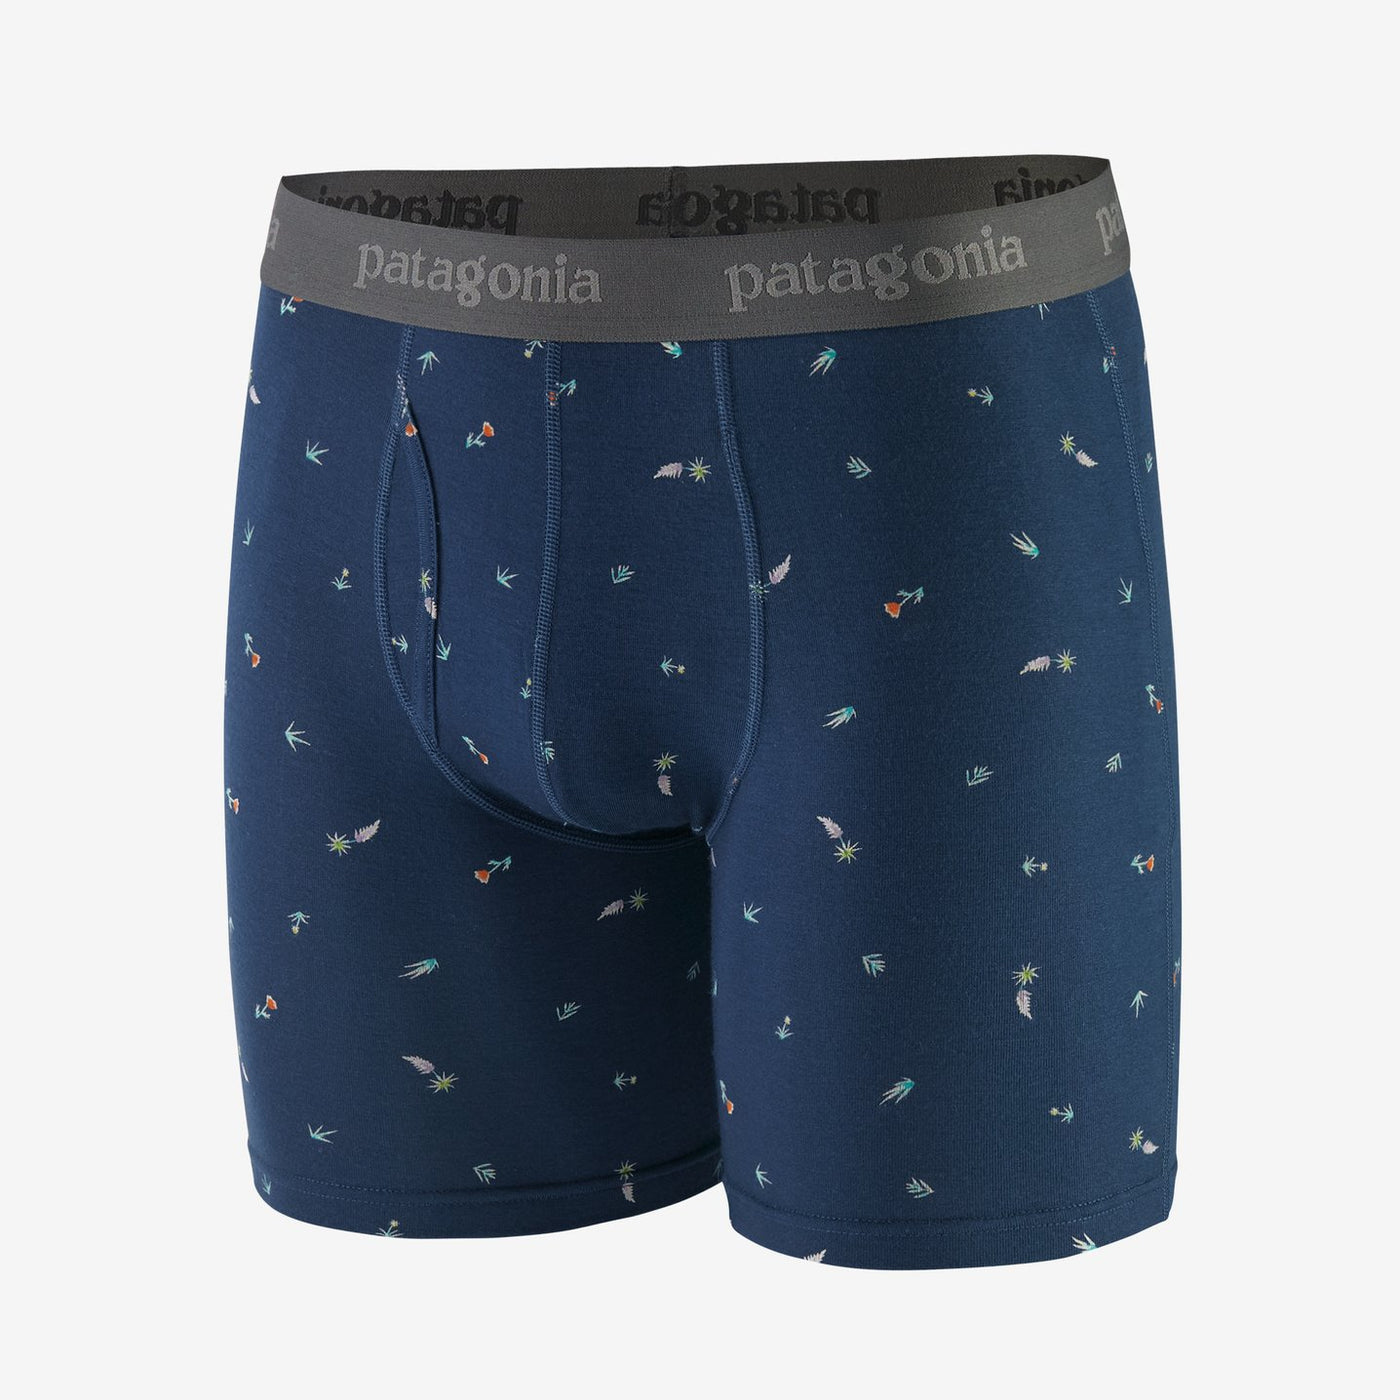 Patagonia Men's Essential Boxer Brief SALE Now 40% Off! – Cutthroat Anglers